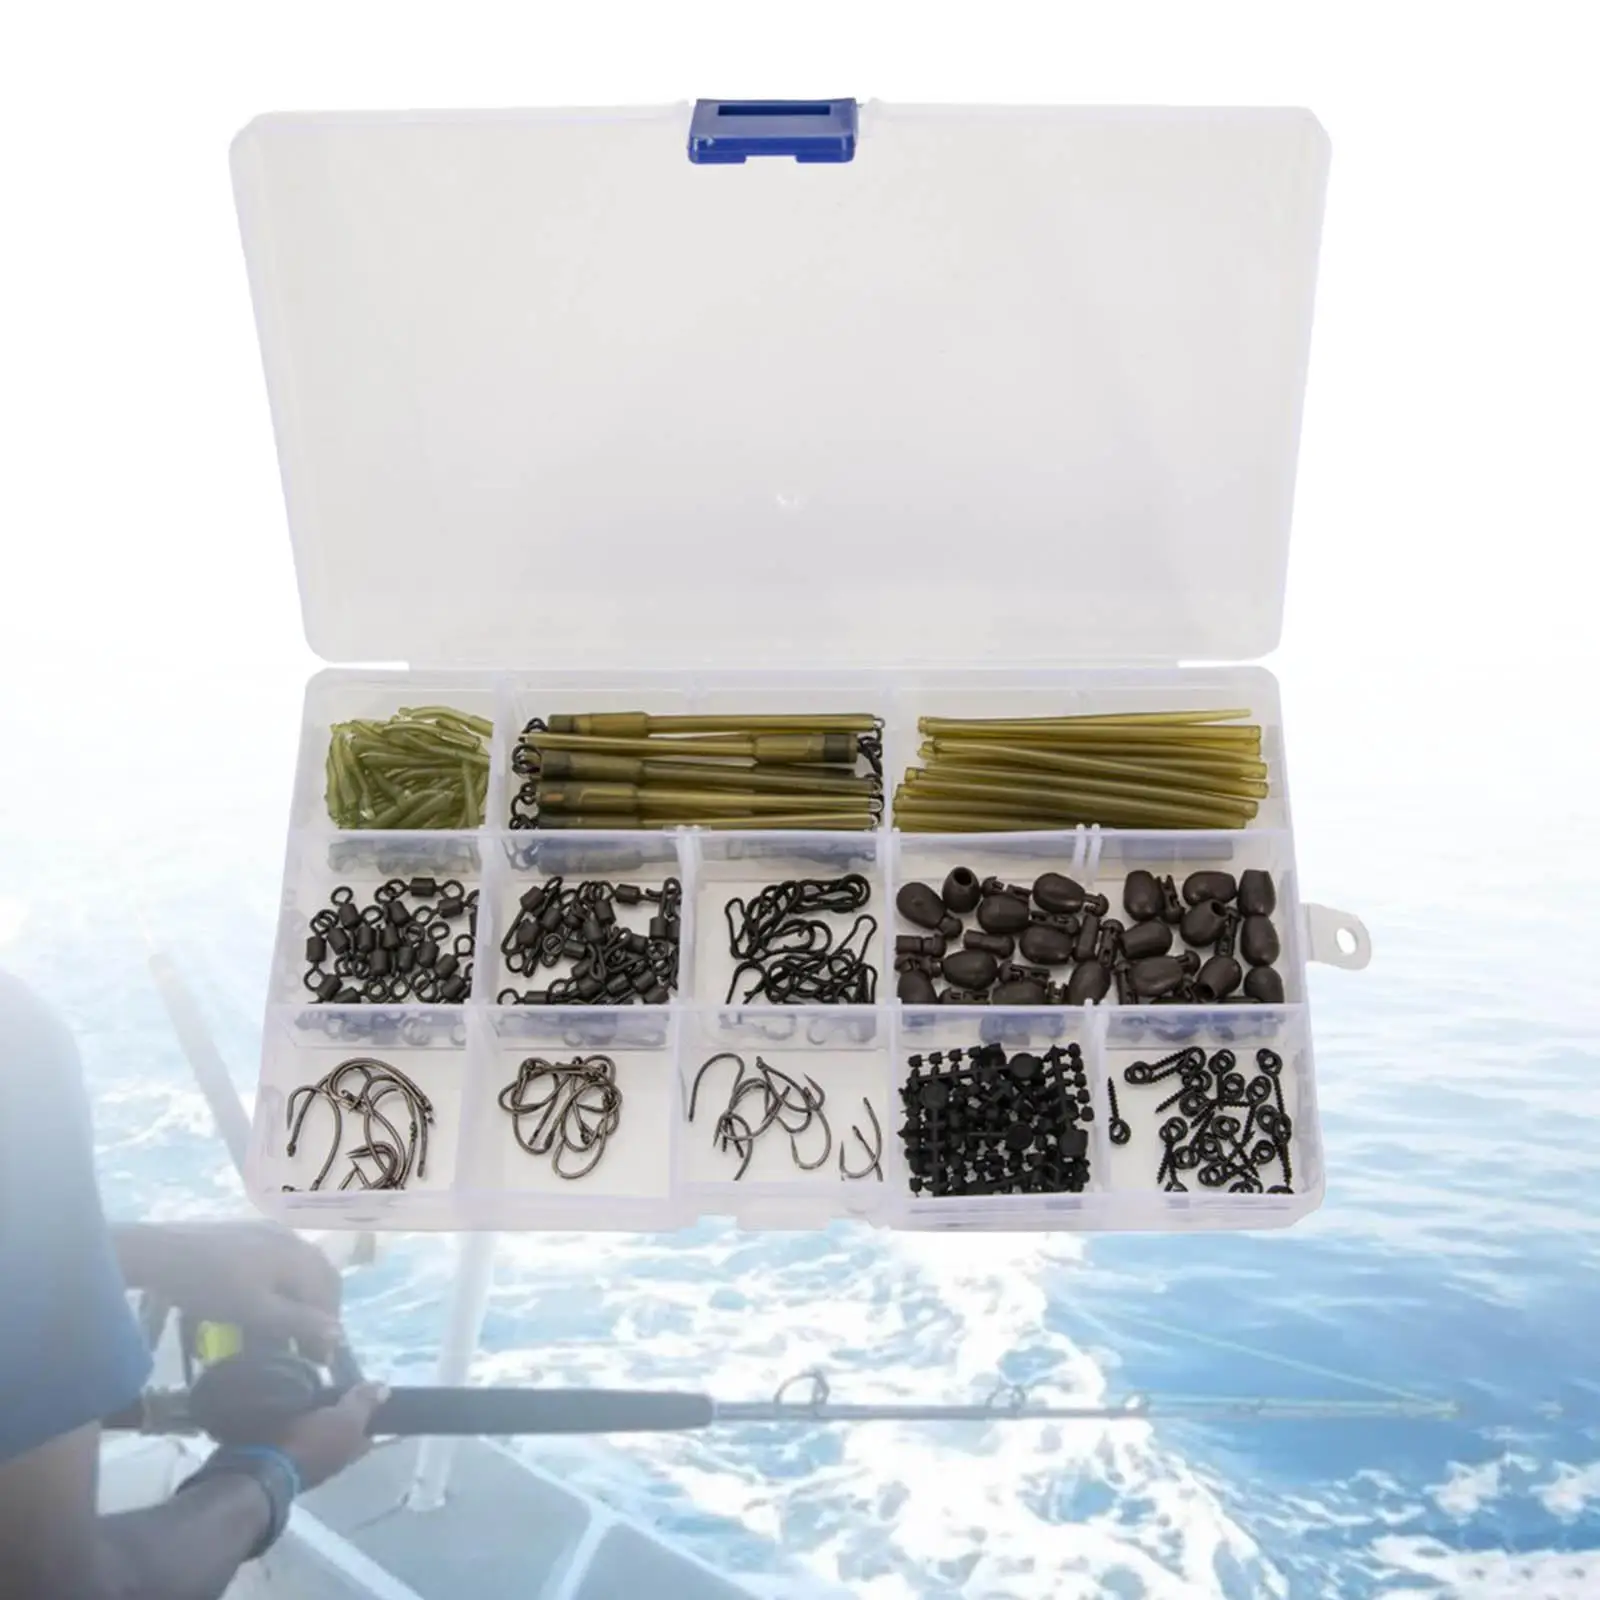 Carp Fishing Accessories Kit High Carbon Steel Hooks with Storage Box Fish Gear Equipment